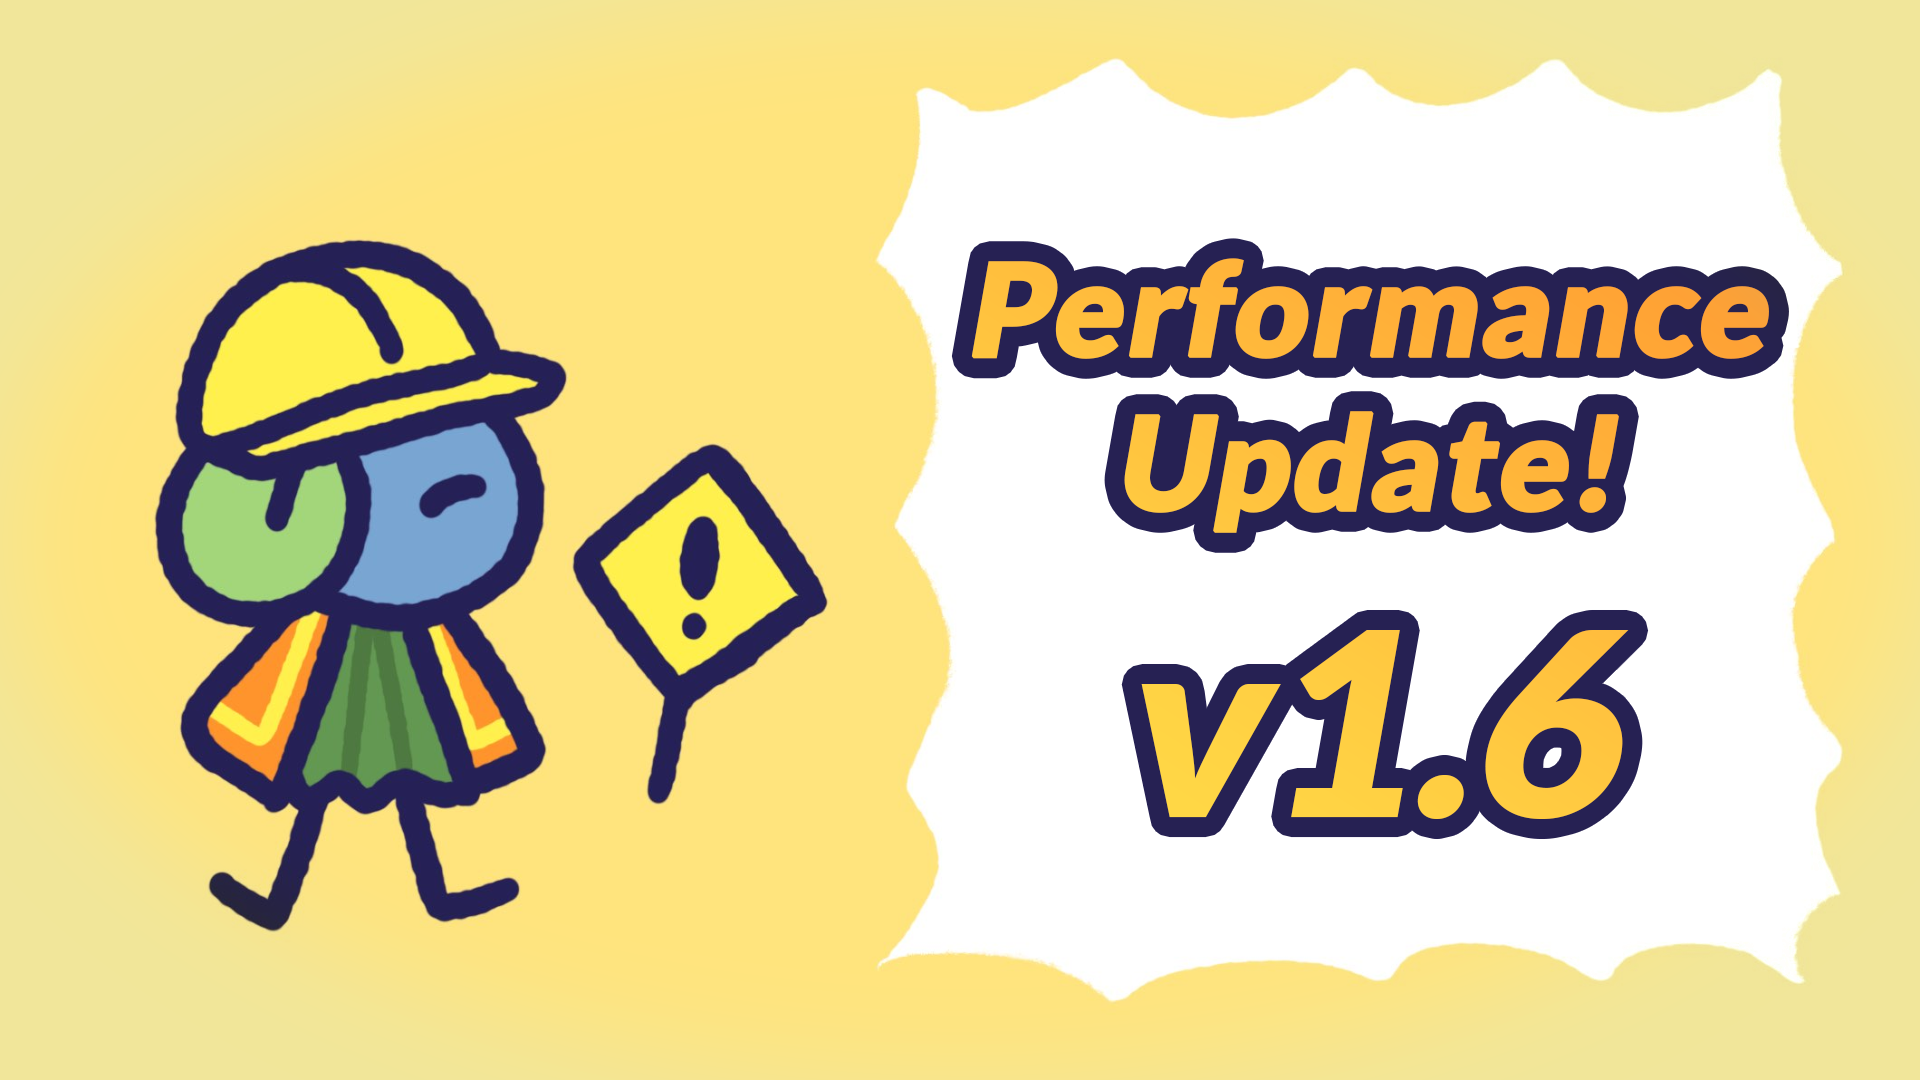 A Tea Minion in a construction uniform promoting a performance update for Sovereign Tea v1.6